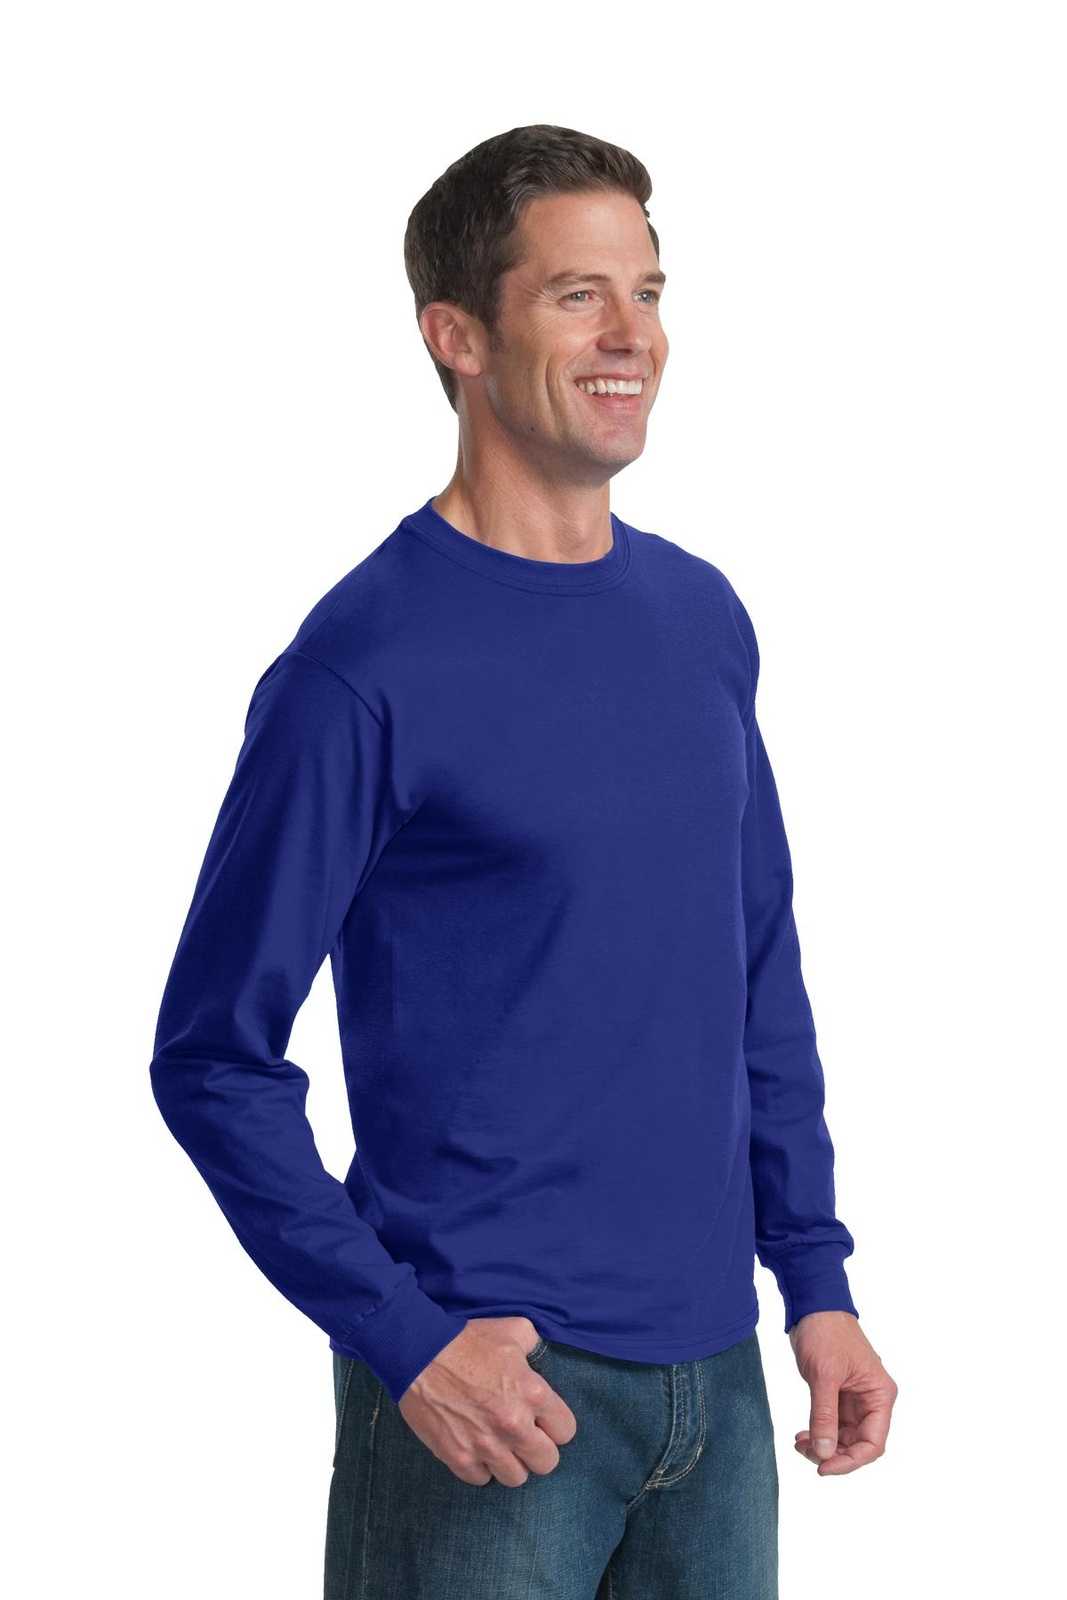 Fruit of the Loom 4930 HD Cotton 100% Cotton Long Sleeve T-Shirt - Royal - HIT a Double